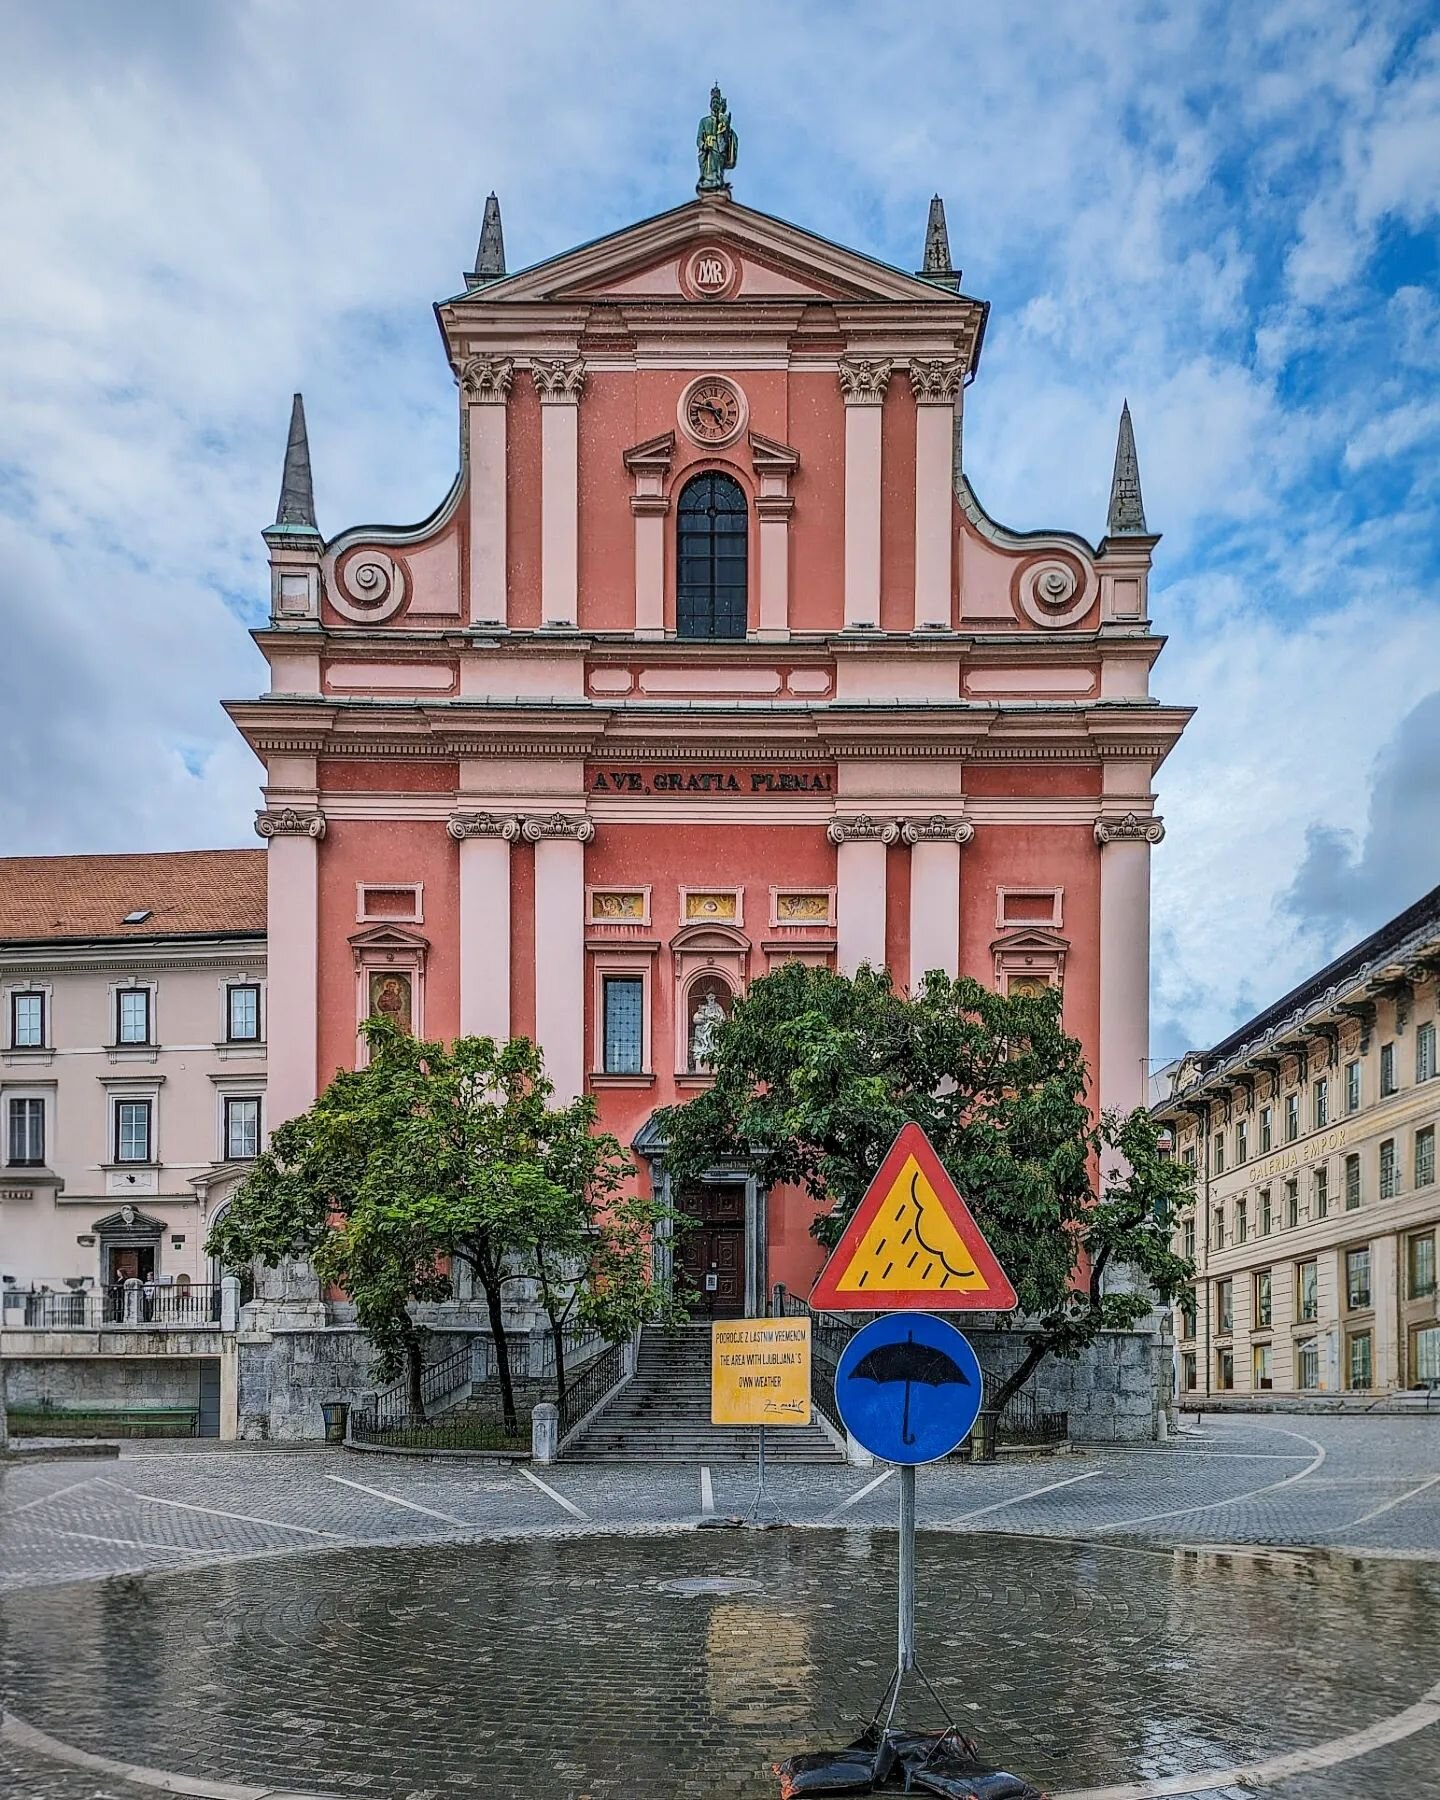 Franciscan Church of the Annunciation
&quot;The Area with Ljubljana's Own Weather&quot;

#ljubljana #slovenia #church #art #artinstallation #weather #rain